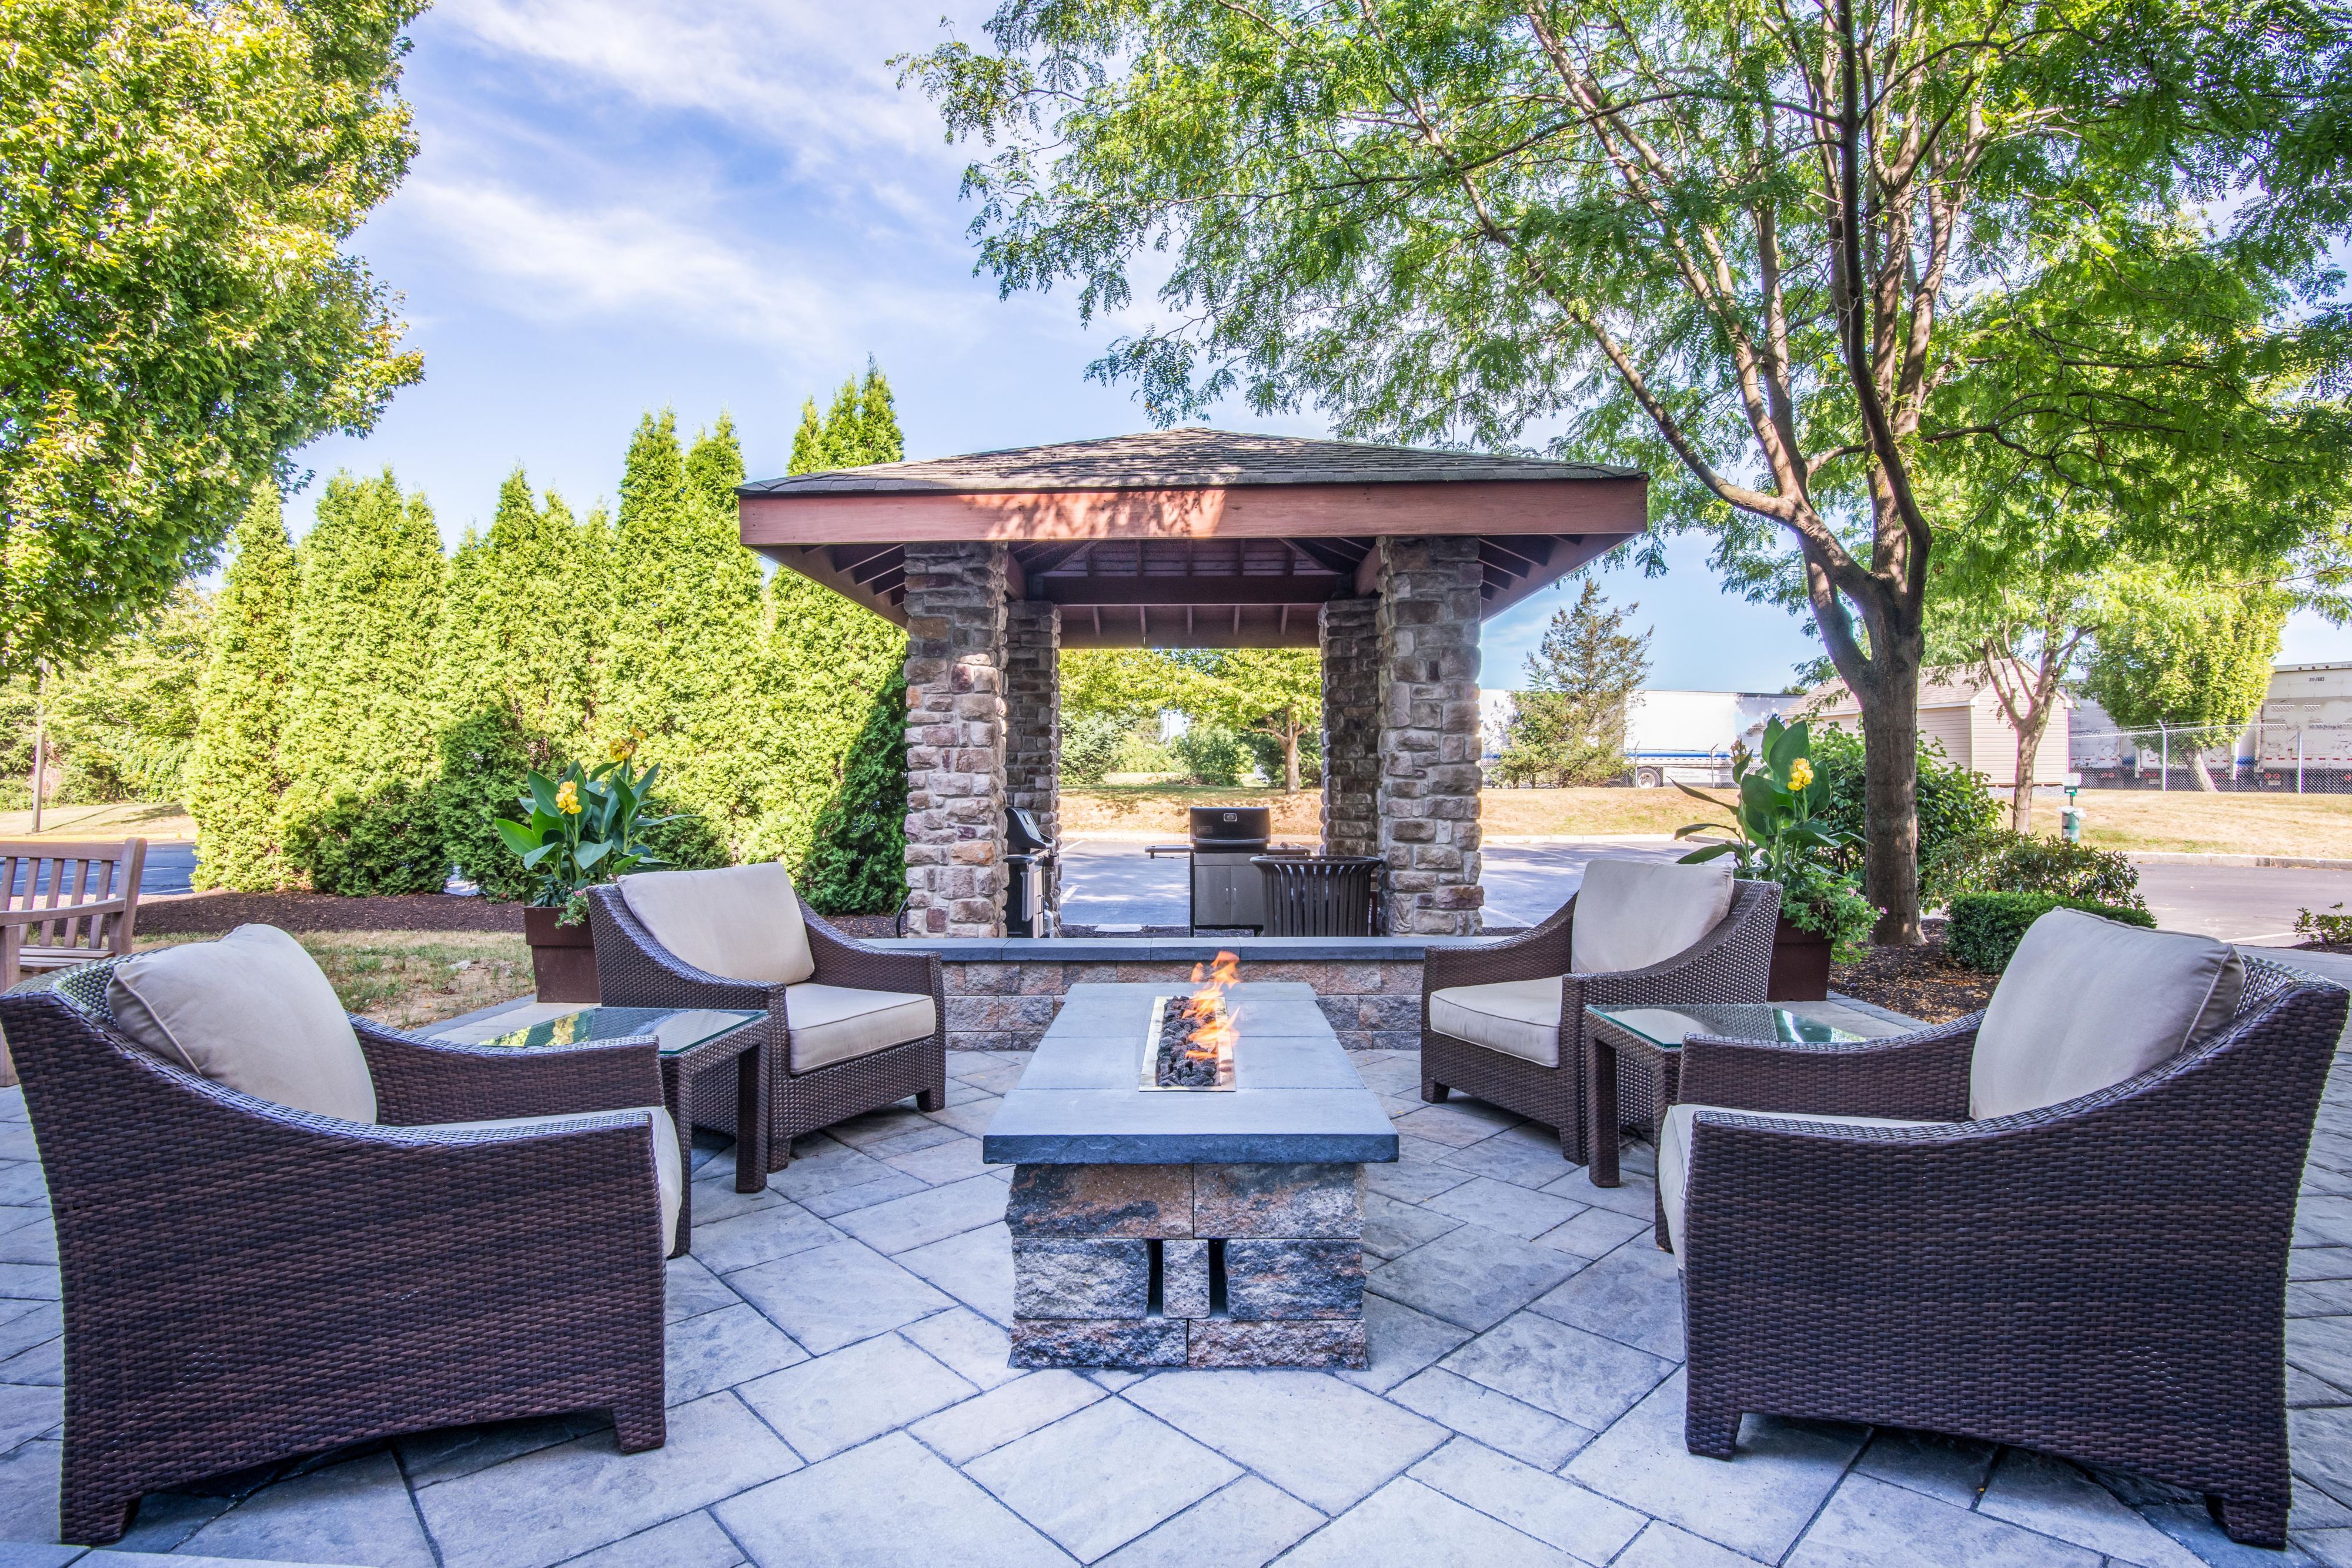 Come enjoy the outdoor courtyard with 2 BBQ grills or sit around our wonderful gas firepit.